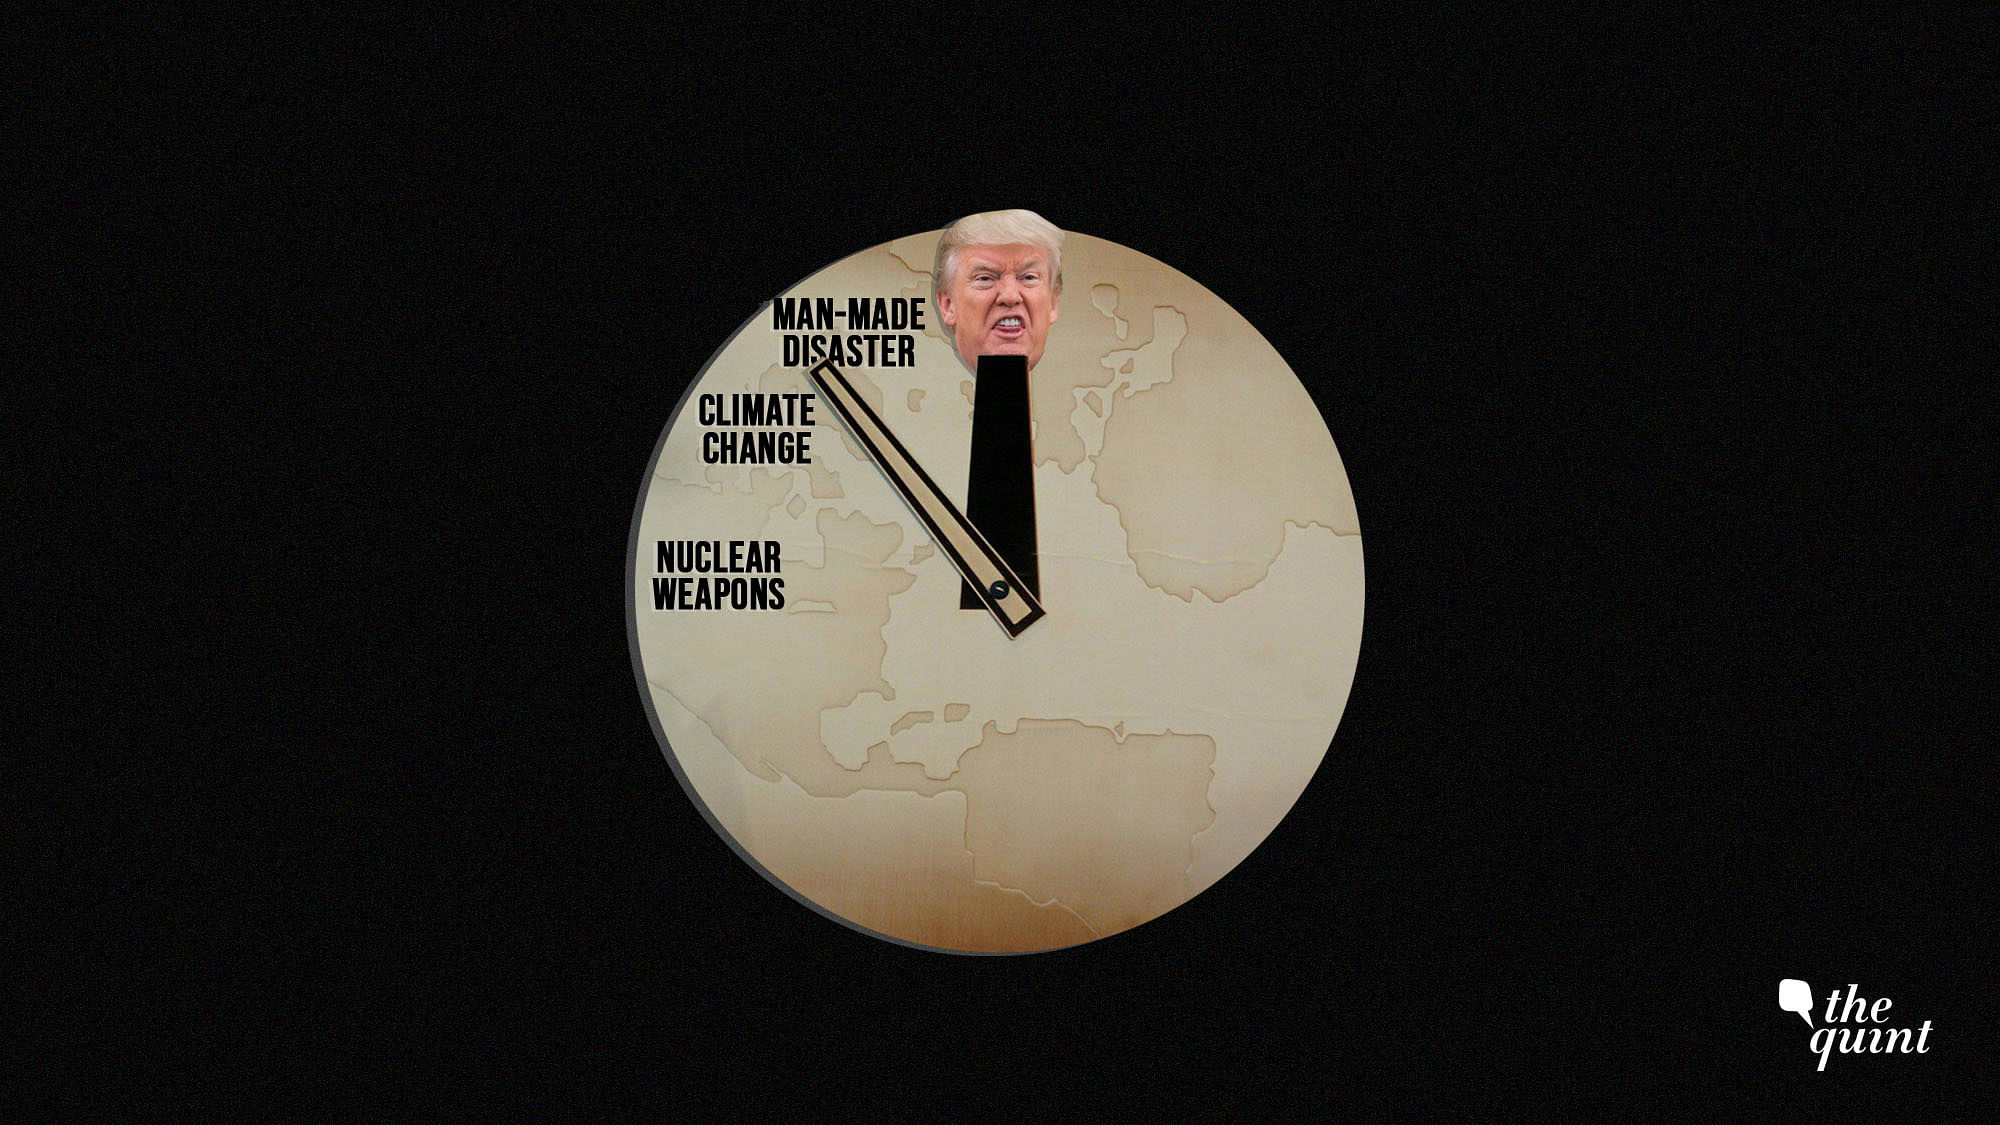 Donald Trump’s questionable nuclear policies have also brought us closer to ‘doomsday’.